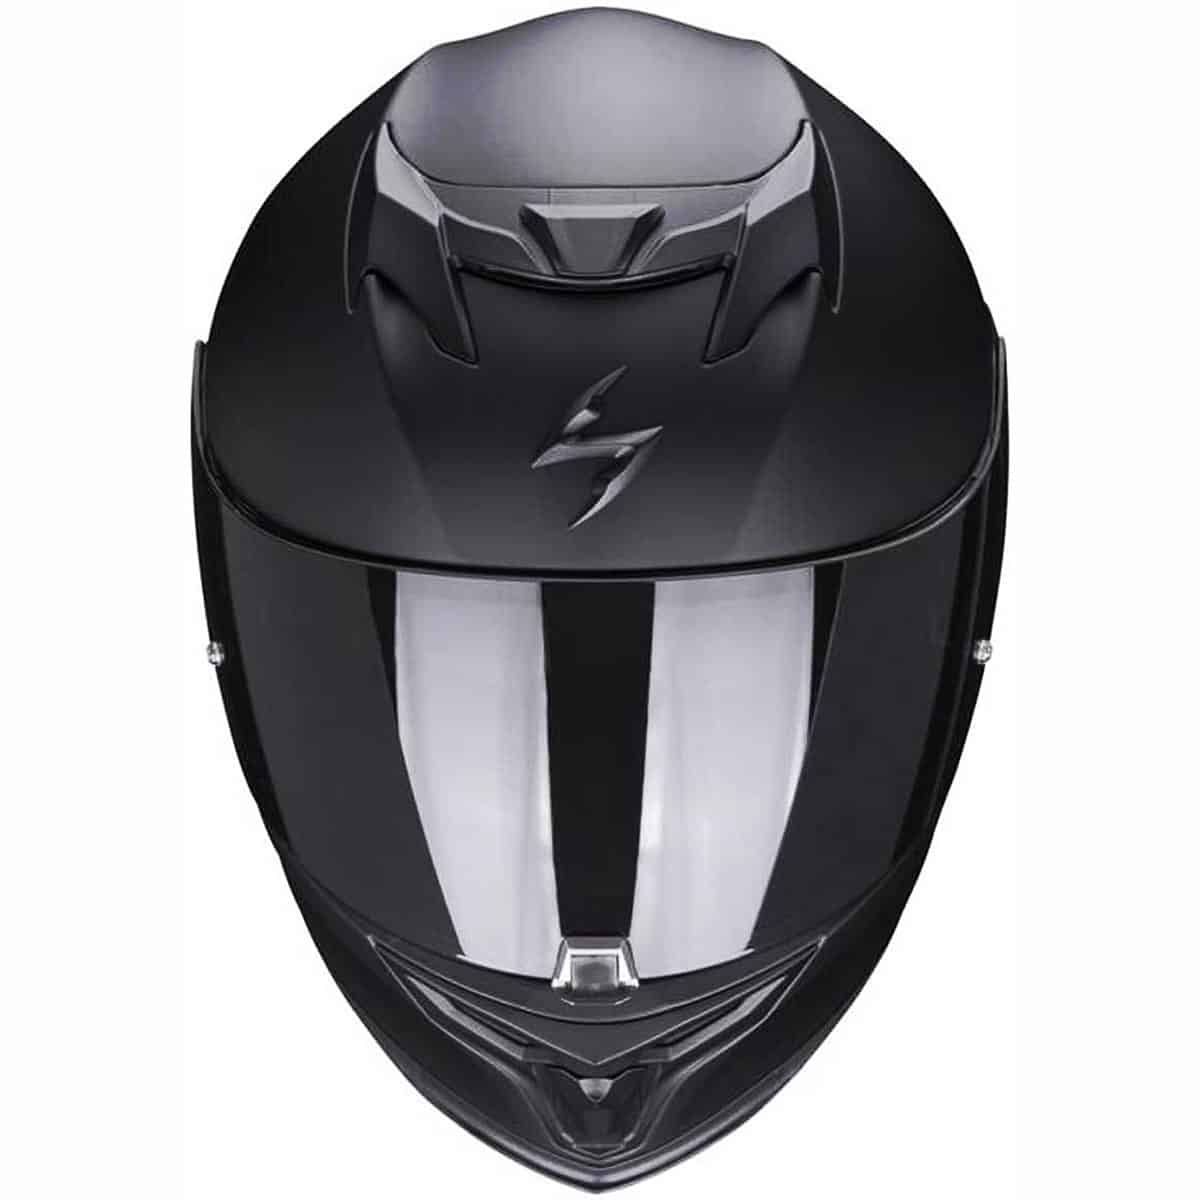 Clear vision in any condition with the Scorpion Exo-520 helmet: Enjoy a stylish fog-free ride with Pinlock 100% Max Vision technology 2